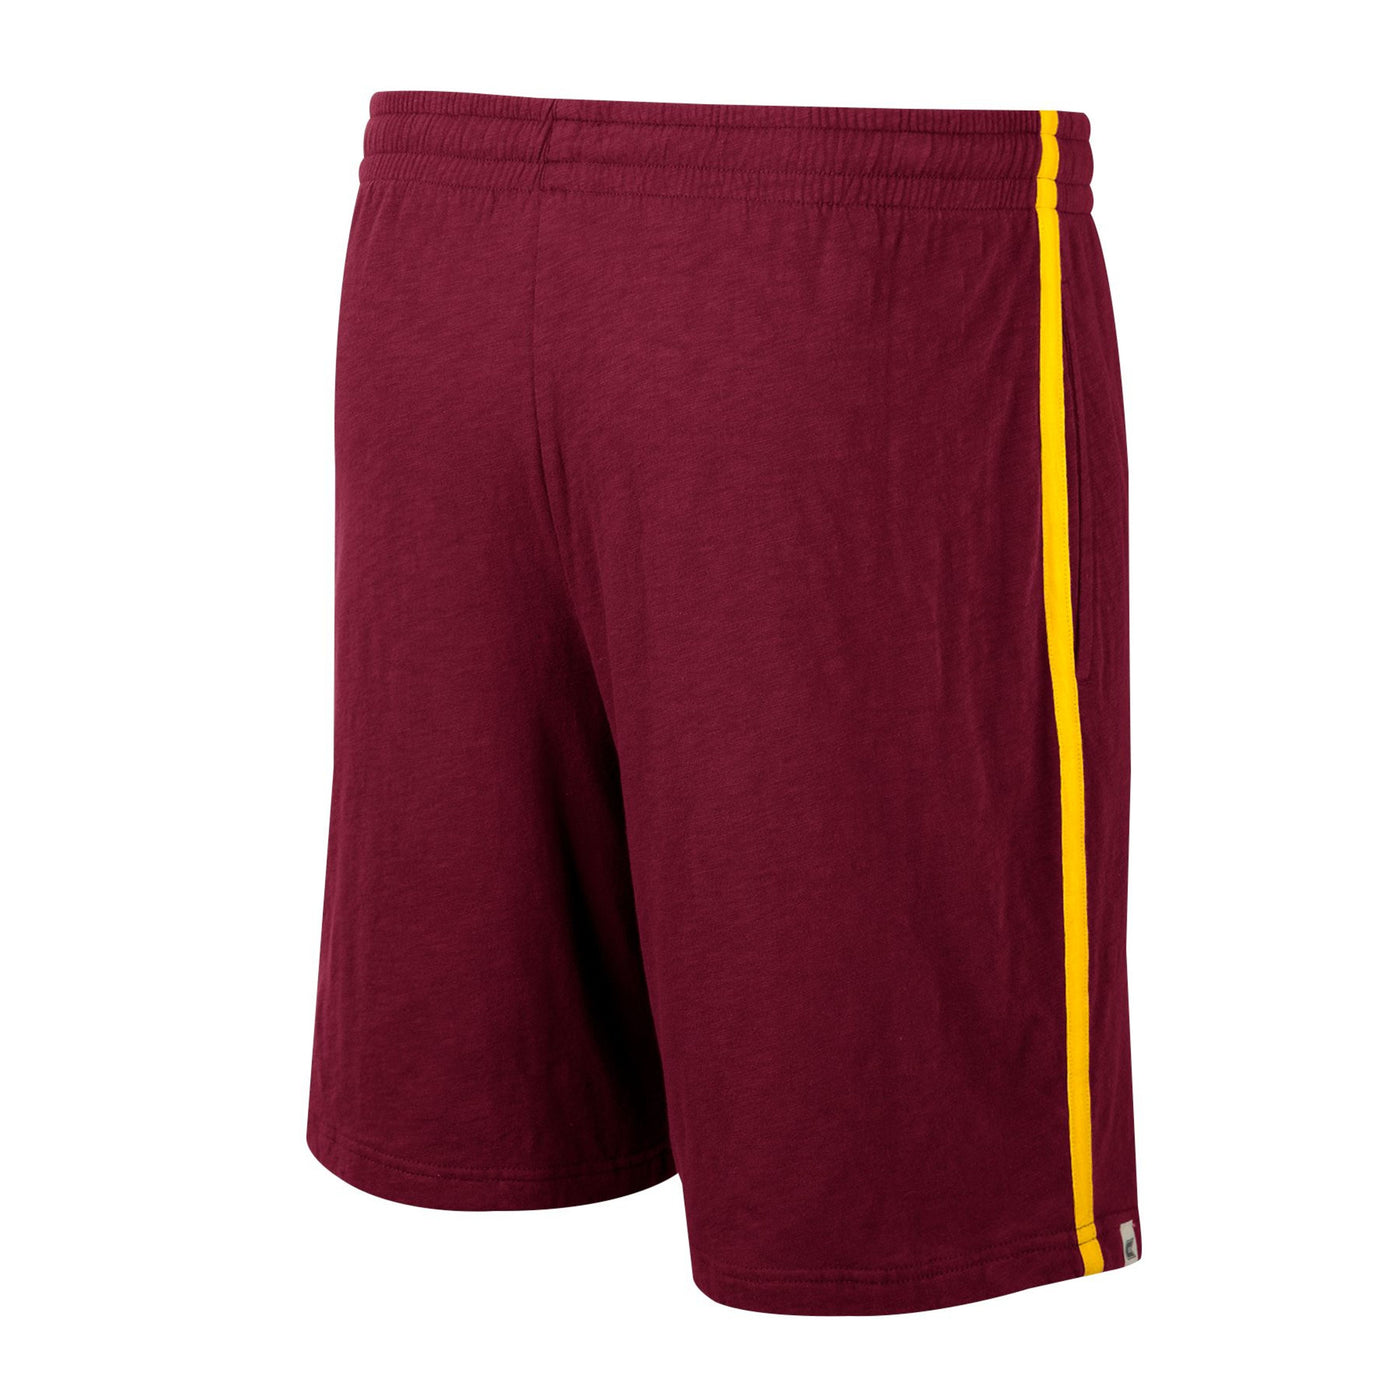 Back view of ASU maroon men's shorts with gold stripe on side of leg